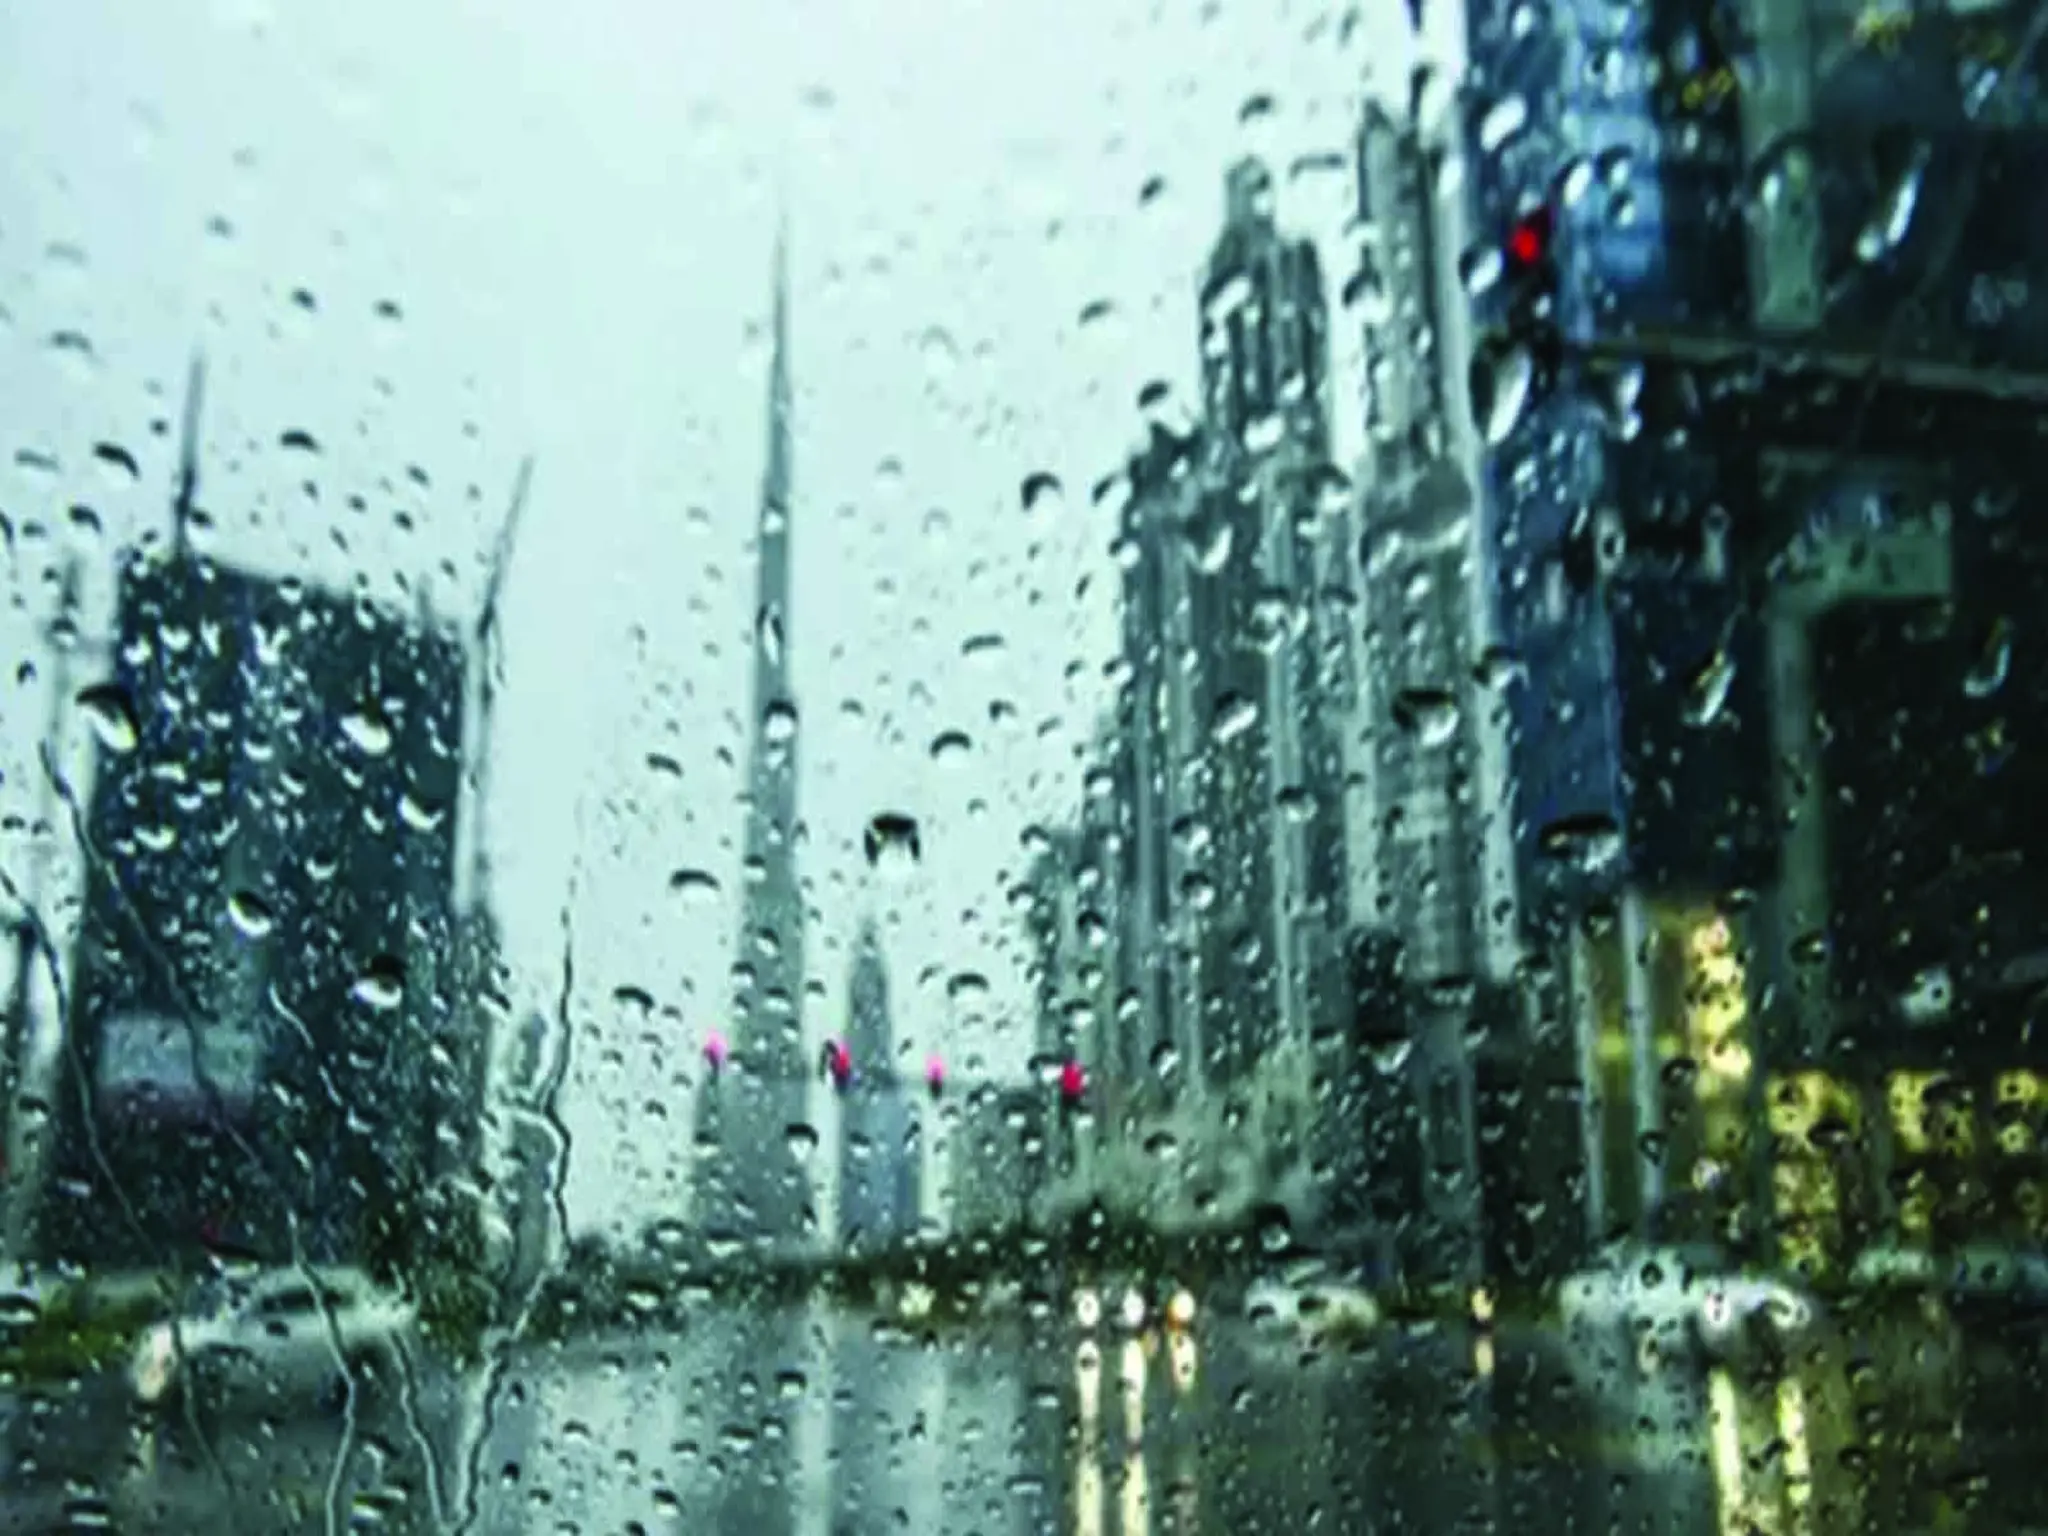 The UAE issues widespread warnings due to heavy rain hitting these areas this week